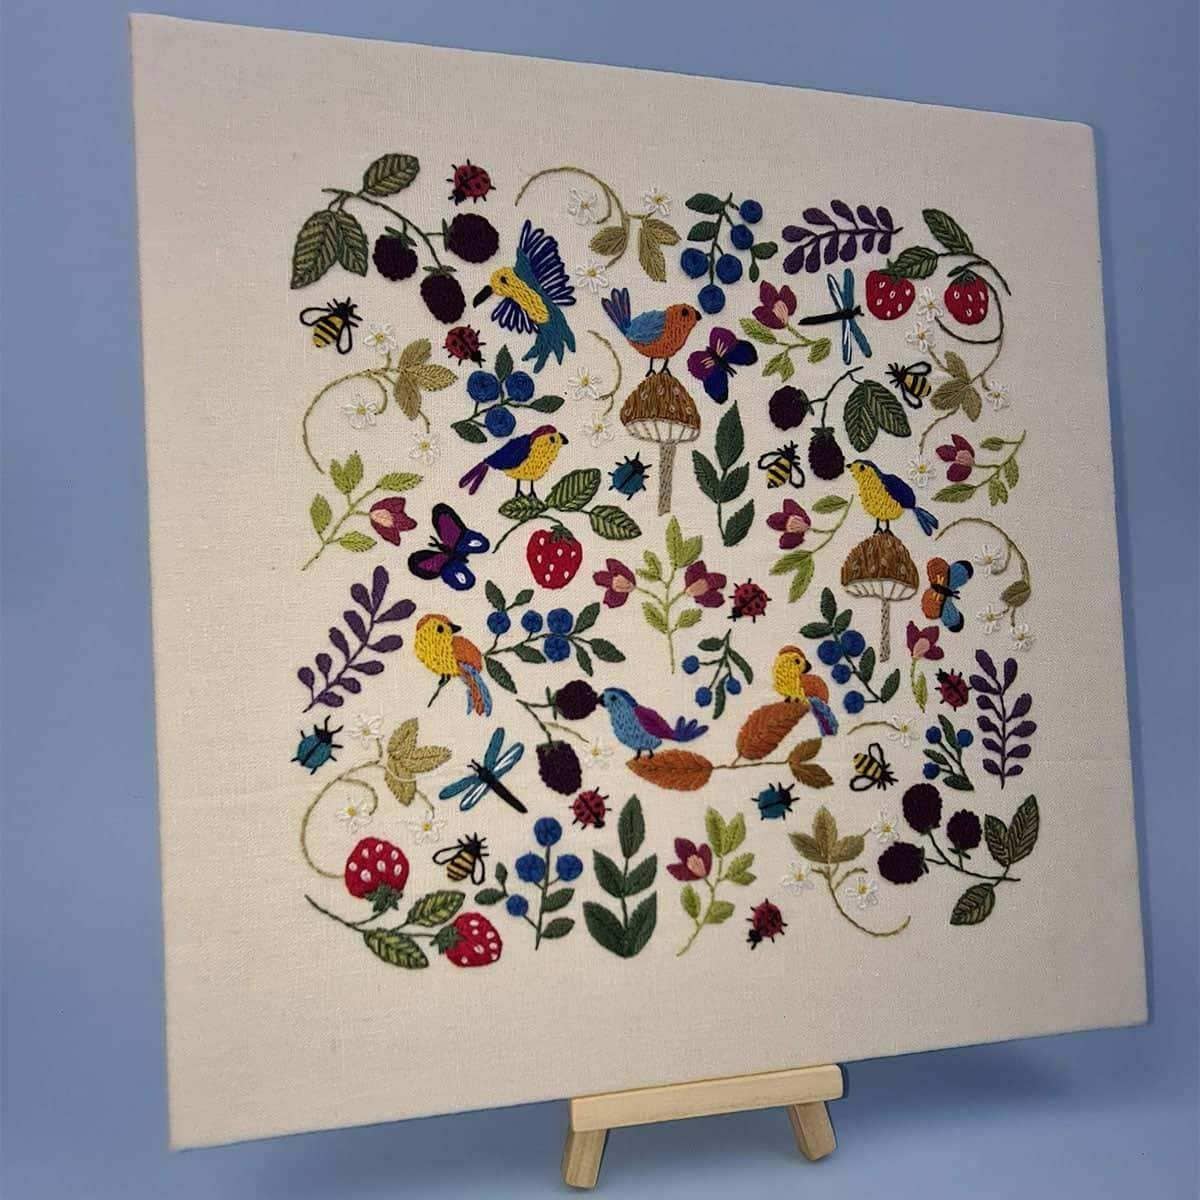 Birds, Bugs and Berries, Hand Embroidery Kit , Embroidery Kit , StitchDoodles , bird embroidery, Embroidery, embroidery hoop, embroidery hoop kit, Embroidery Kit, embroidery kit for adults, embroidery kit fro beginners, embroidery pattern, hand embroidery, hand embroidery fabric, hand embroidery kit, hand embroidery seat frame, hand embroidery thread, modern embroidery kits, nurge embroidery hoop, Printed Pattern, wildlife embroidery , StitchDoodles , shop.stitchdoodles.com